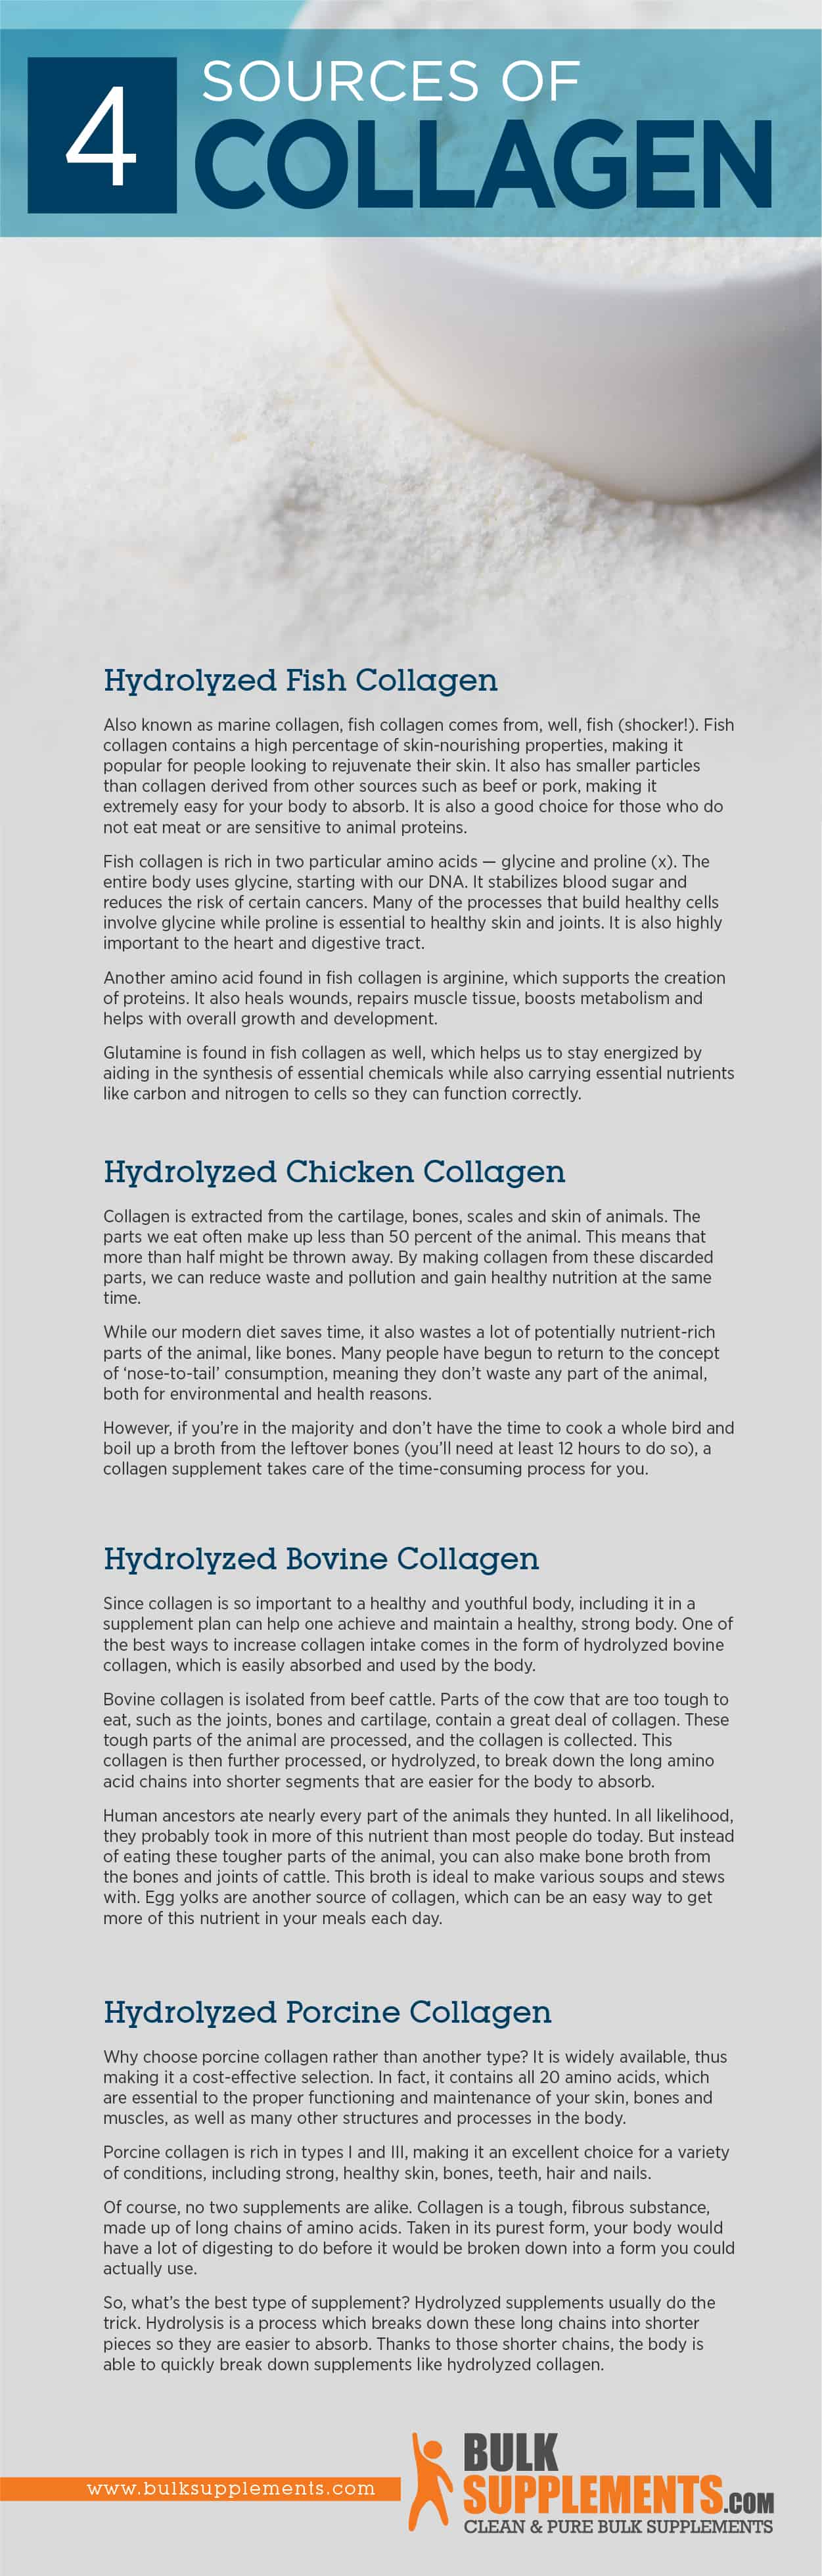 sources of collage protein powder